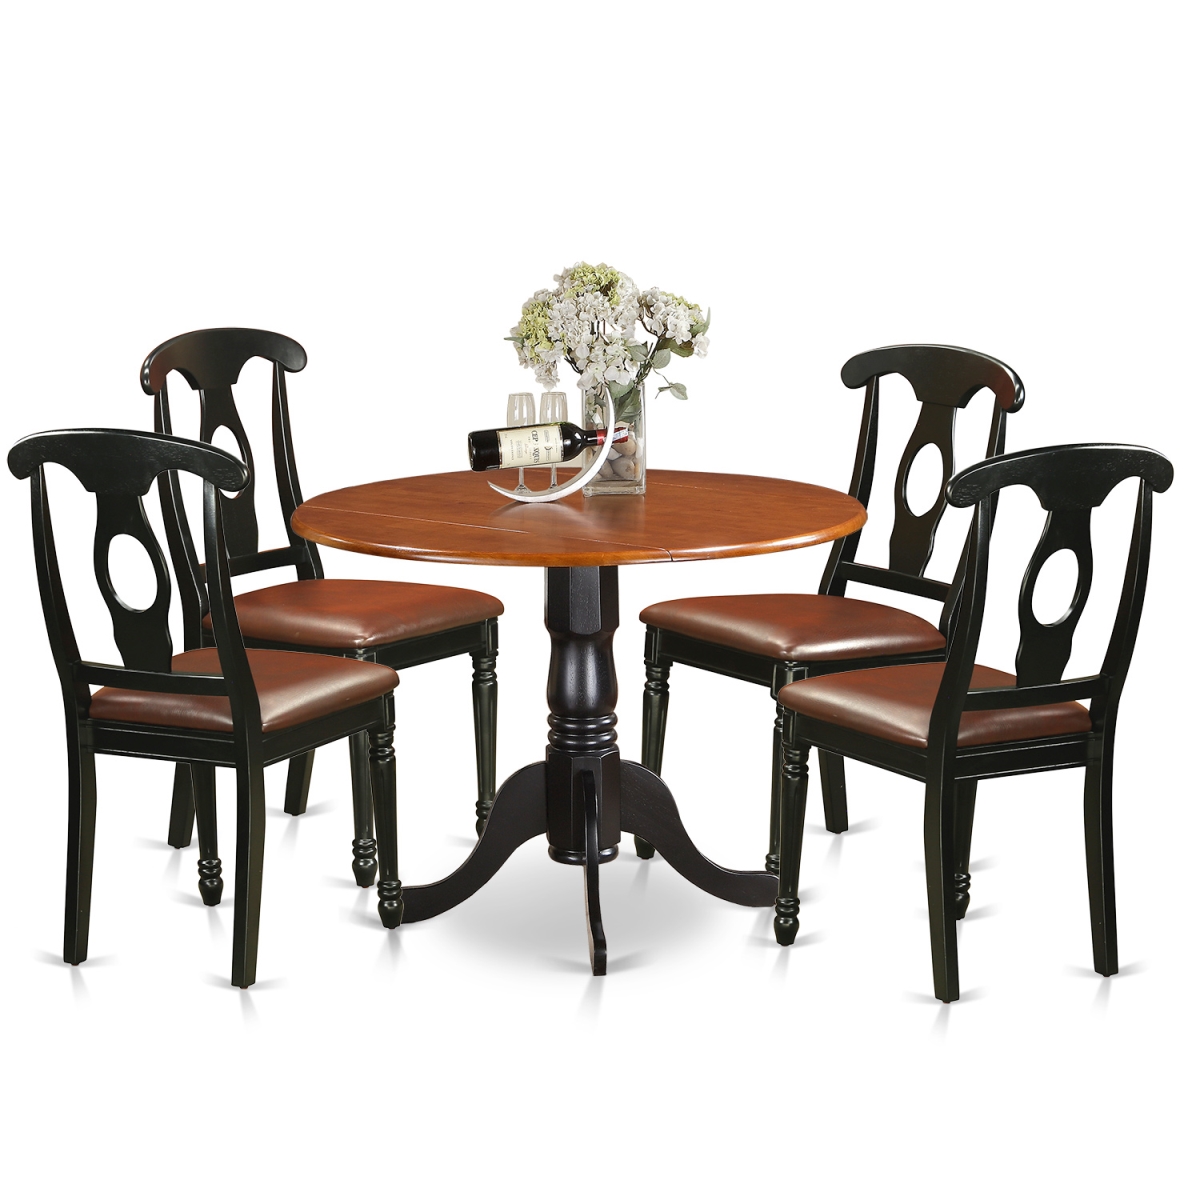 Picture of East West Furniture DLKE5-BCH-LC Faux Leather Dublin Kitchen Table Set - Dining Table & 4 Chairs, Black & Cherry - 5 Piece